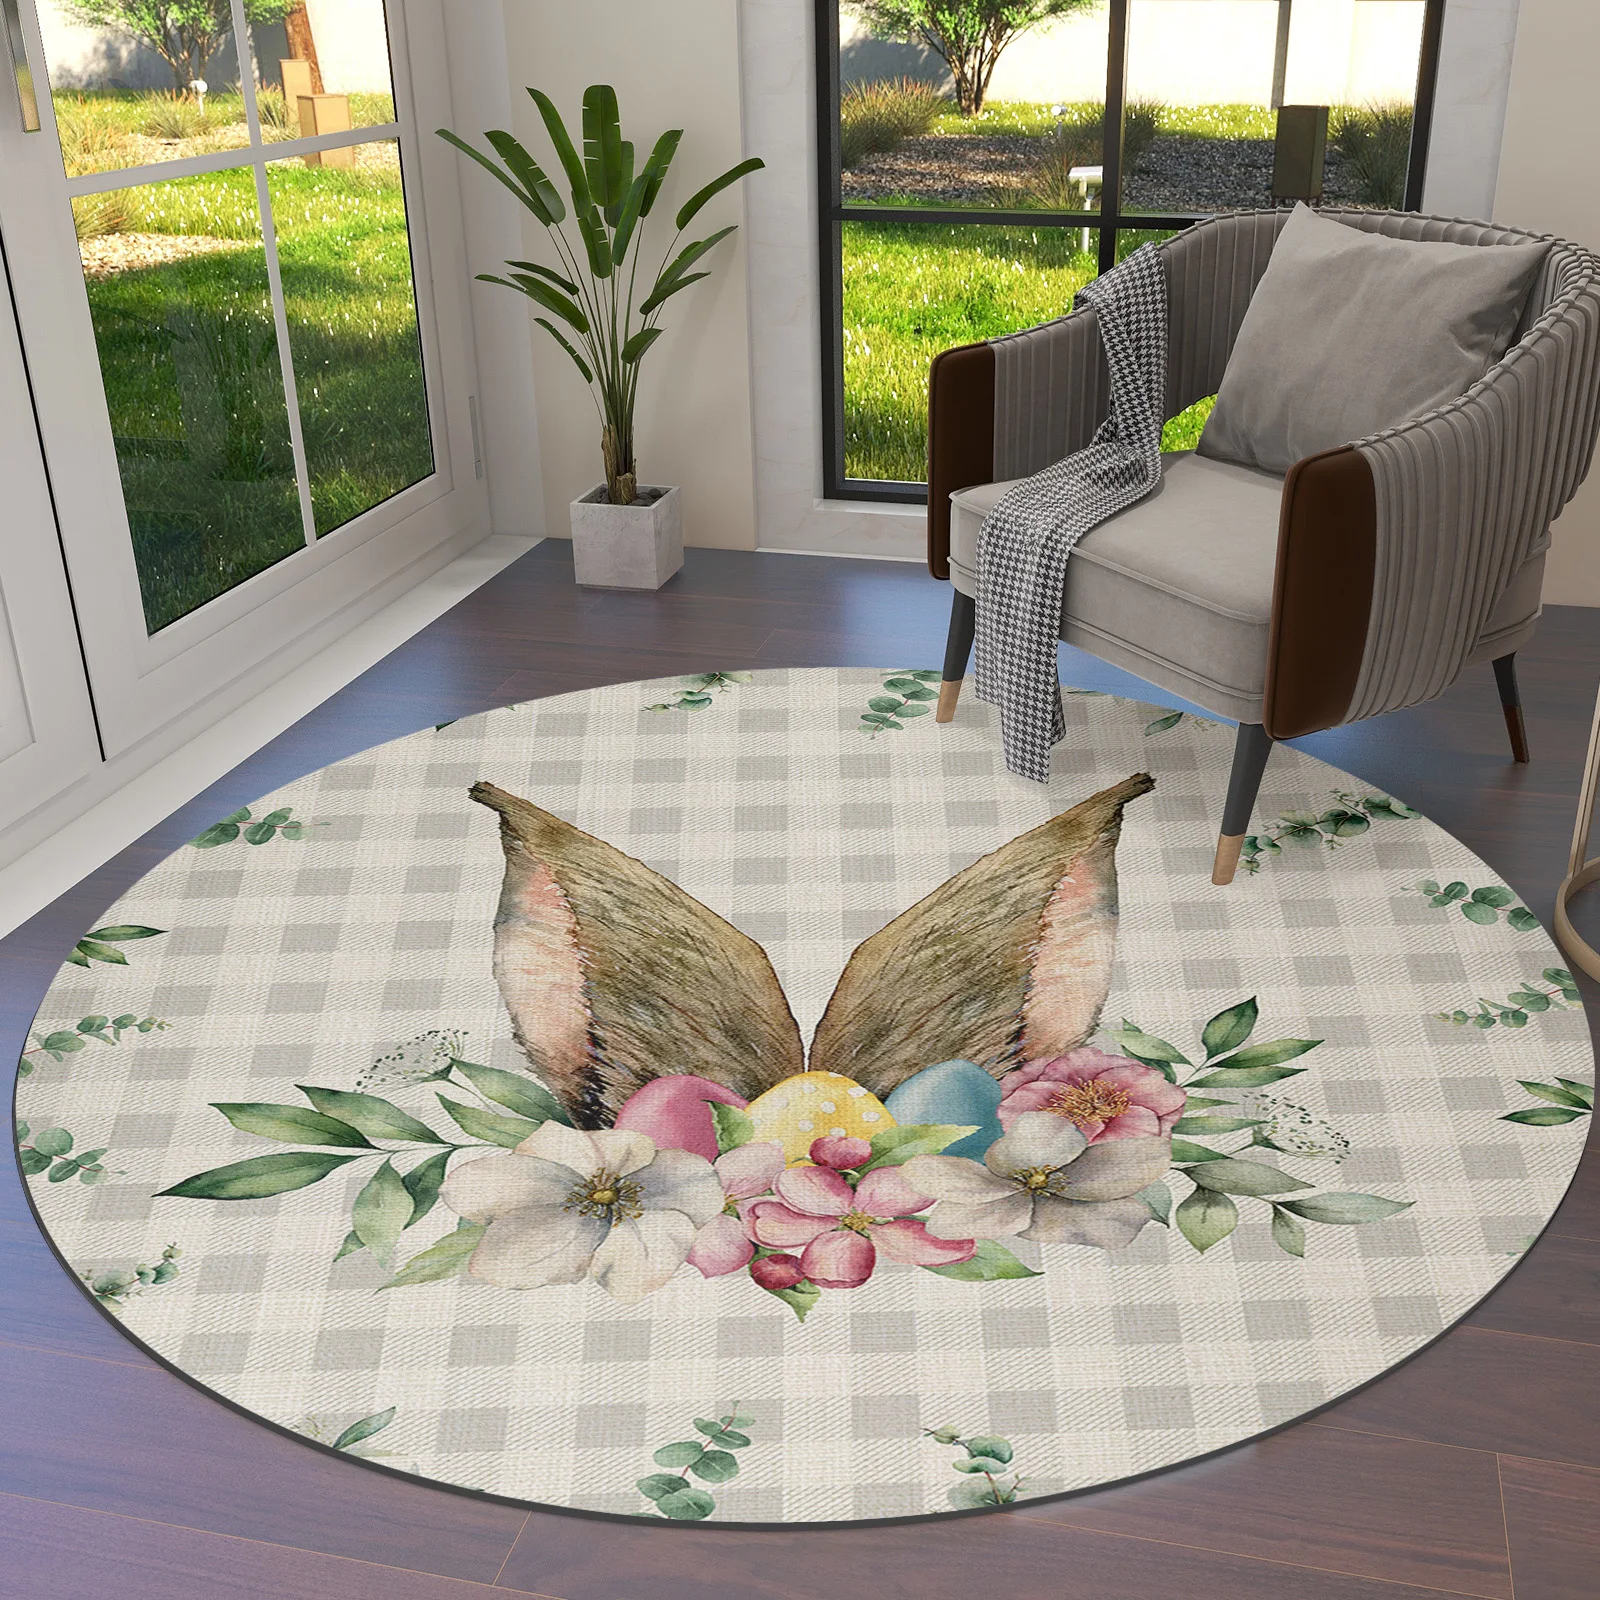 

Easter Flowers Eucalyptus Rabbit Ears Round Area Rug Carpets For Living Room Large Mat Home Bedroom Kid Room Decoration